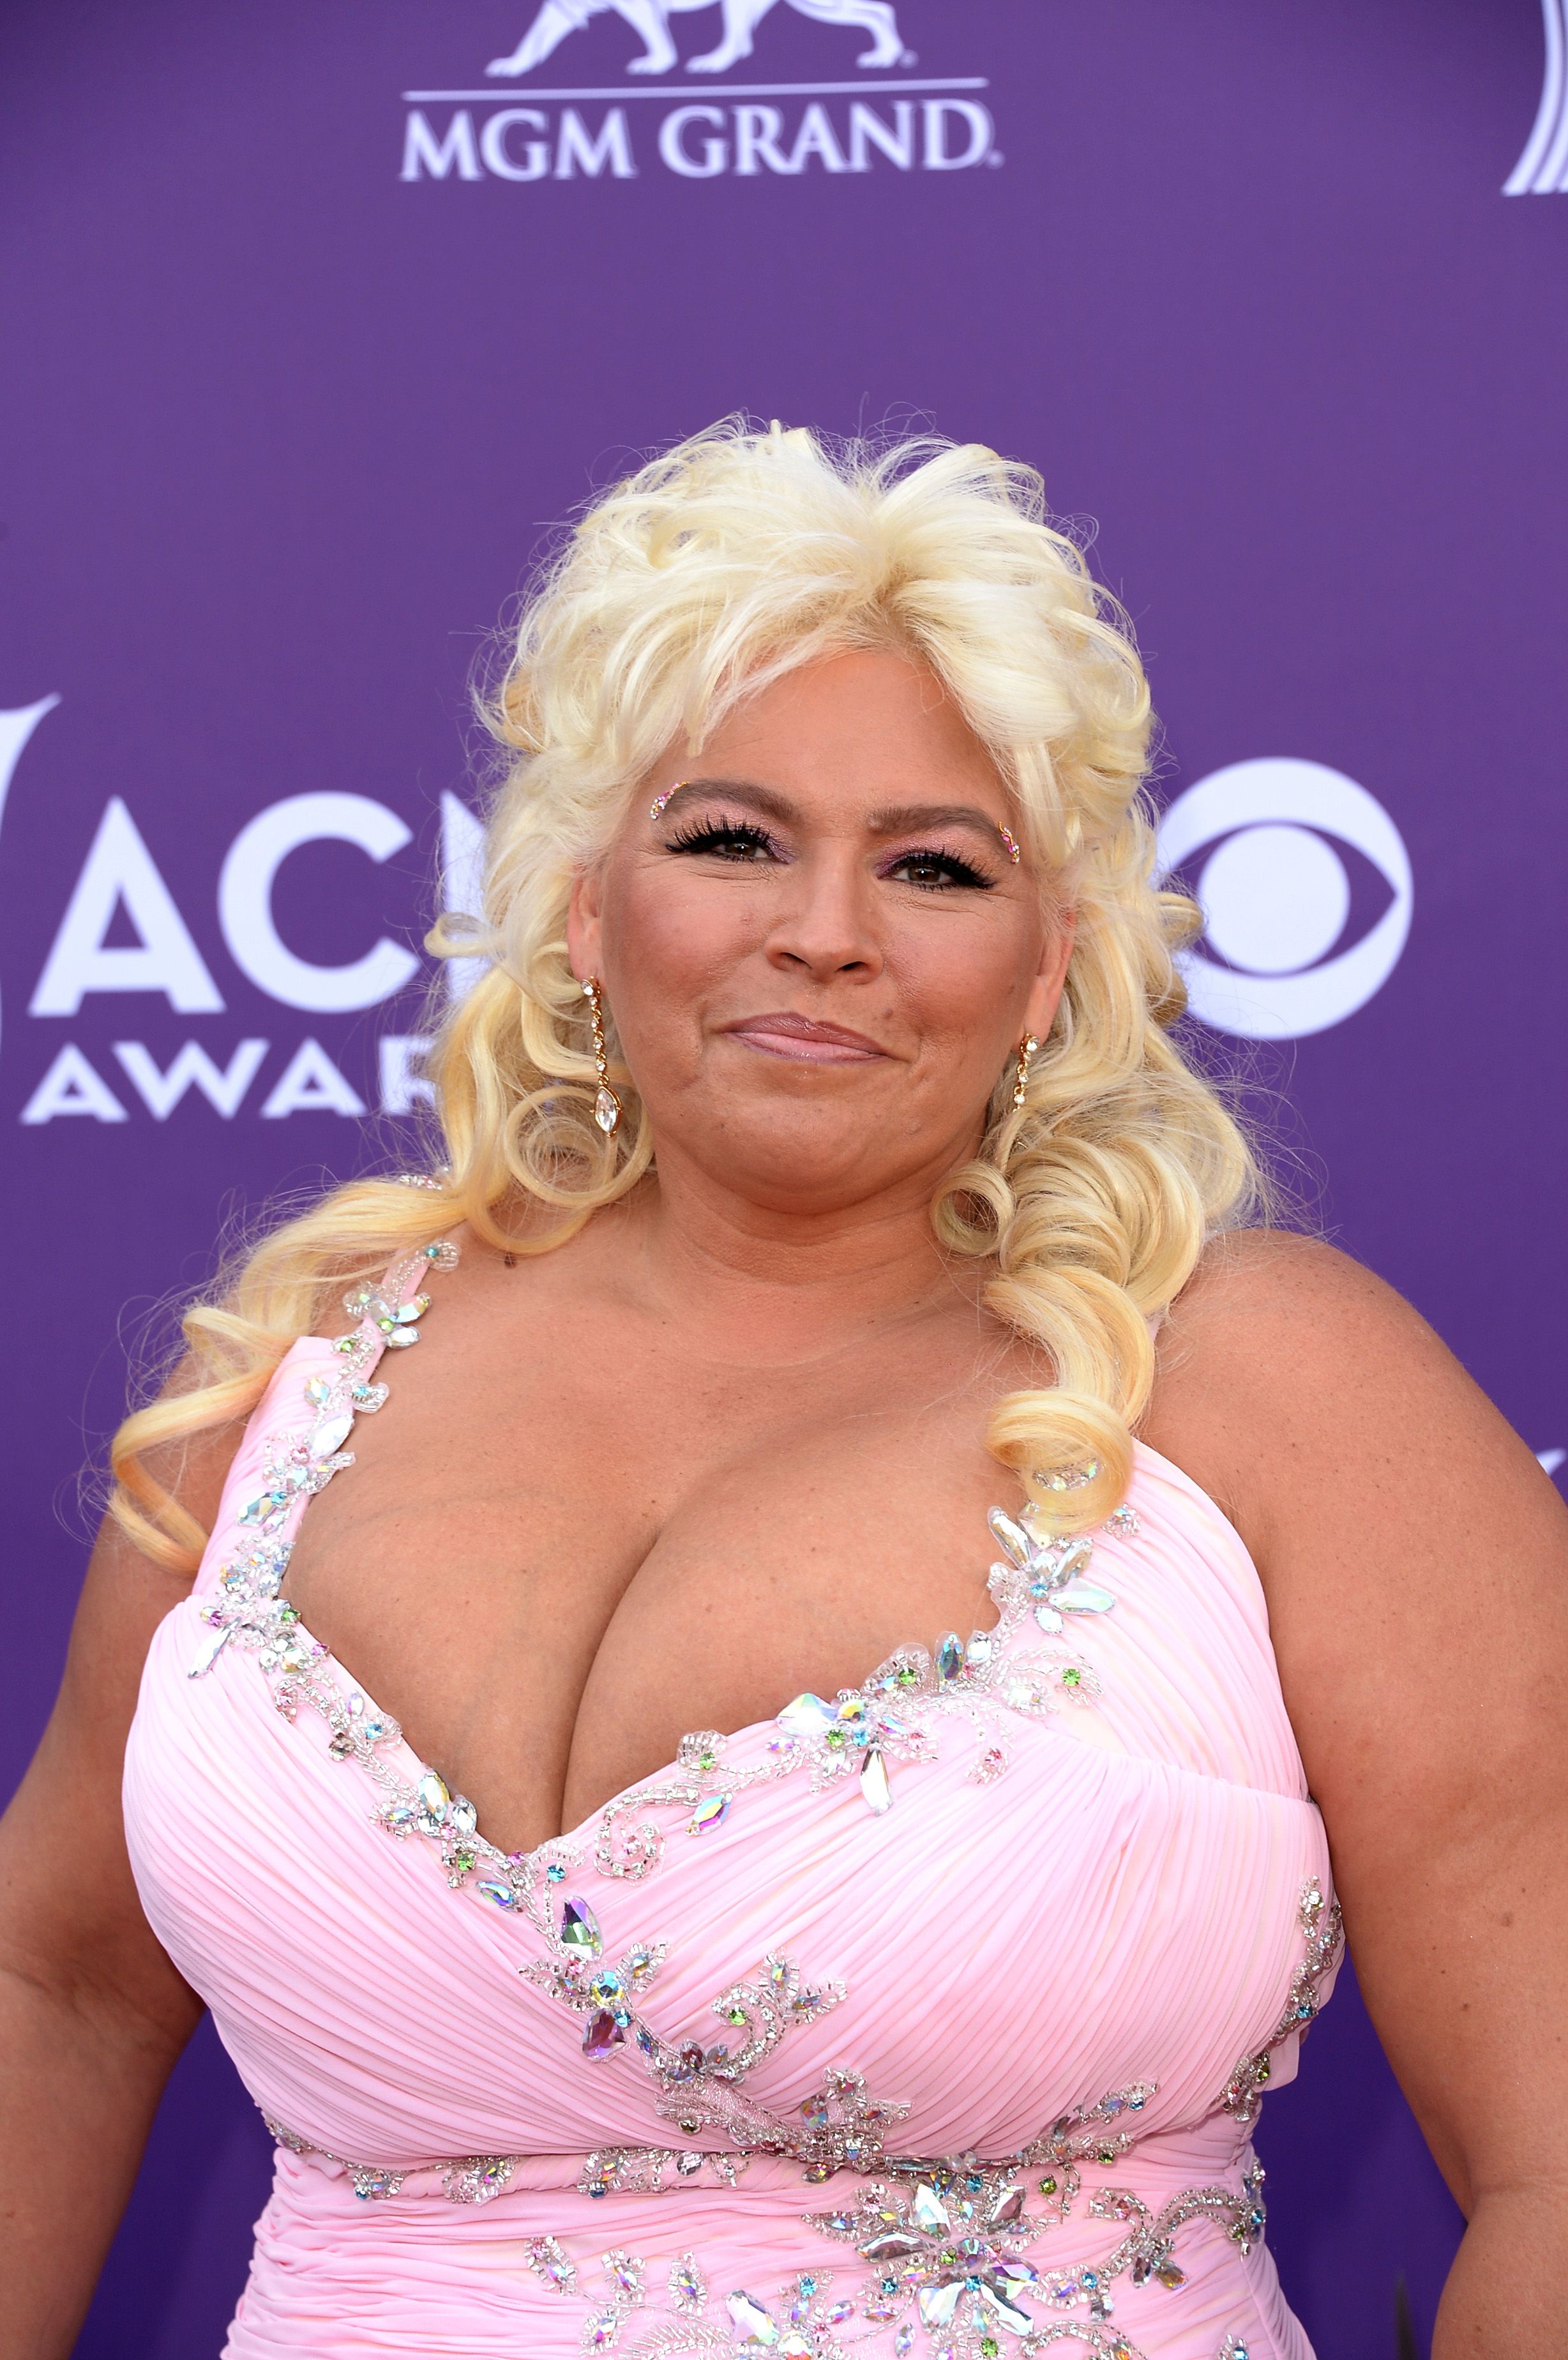 angie smiley recommends beth chapman nude photos pic